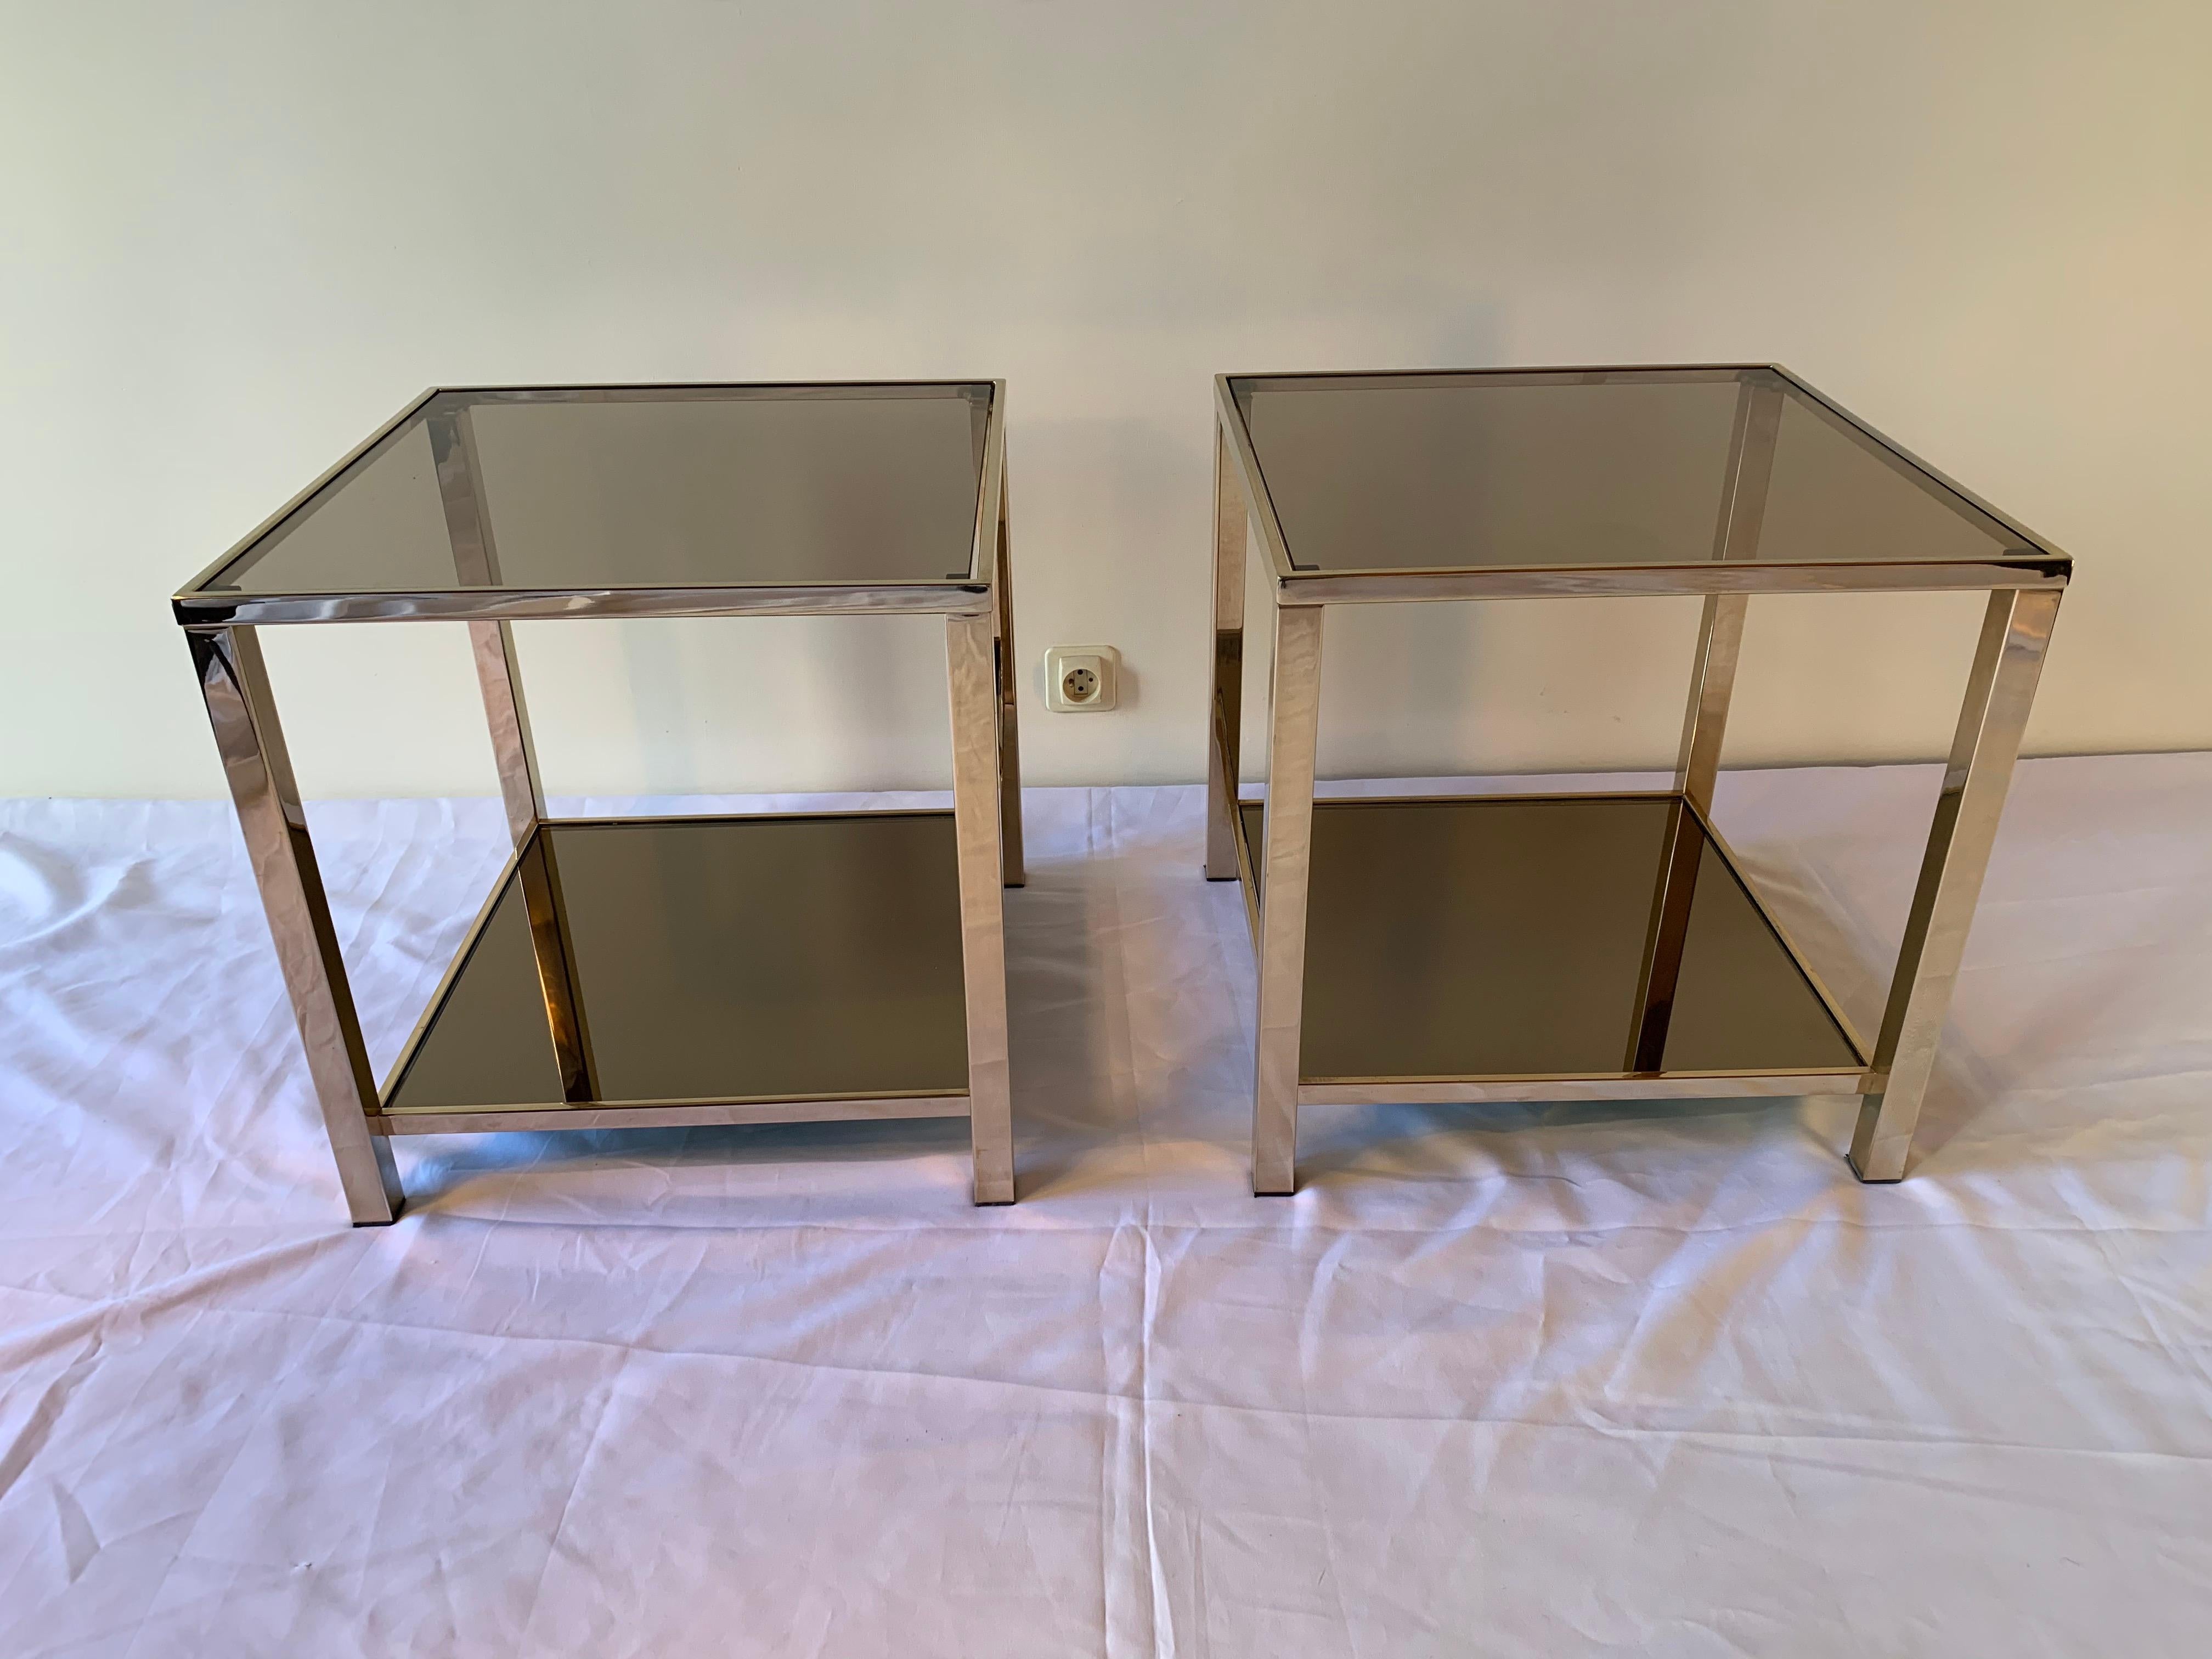 Beautiful pair of side tables with two levels designed and produced by Belgo Chrome, 1970s. The structure, gilded with 23-carat gold, showcases two trays. The top tray is made of smoked glass while the bottom tray is made of bronze mirror. The table